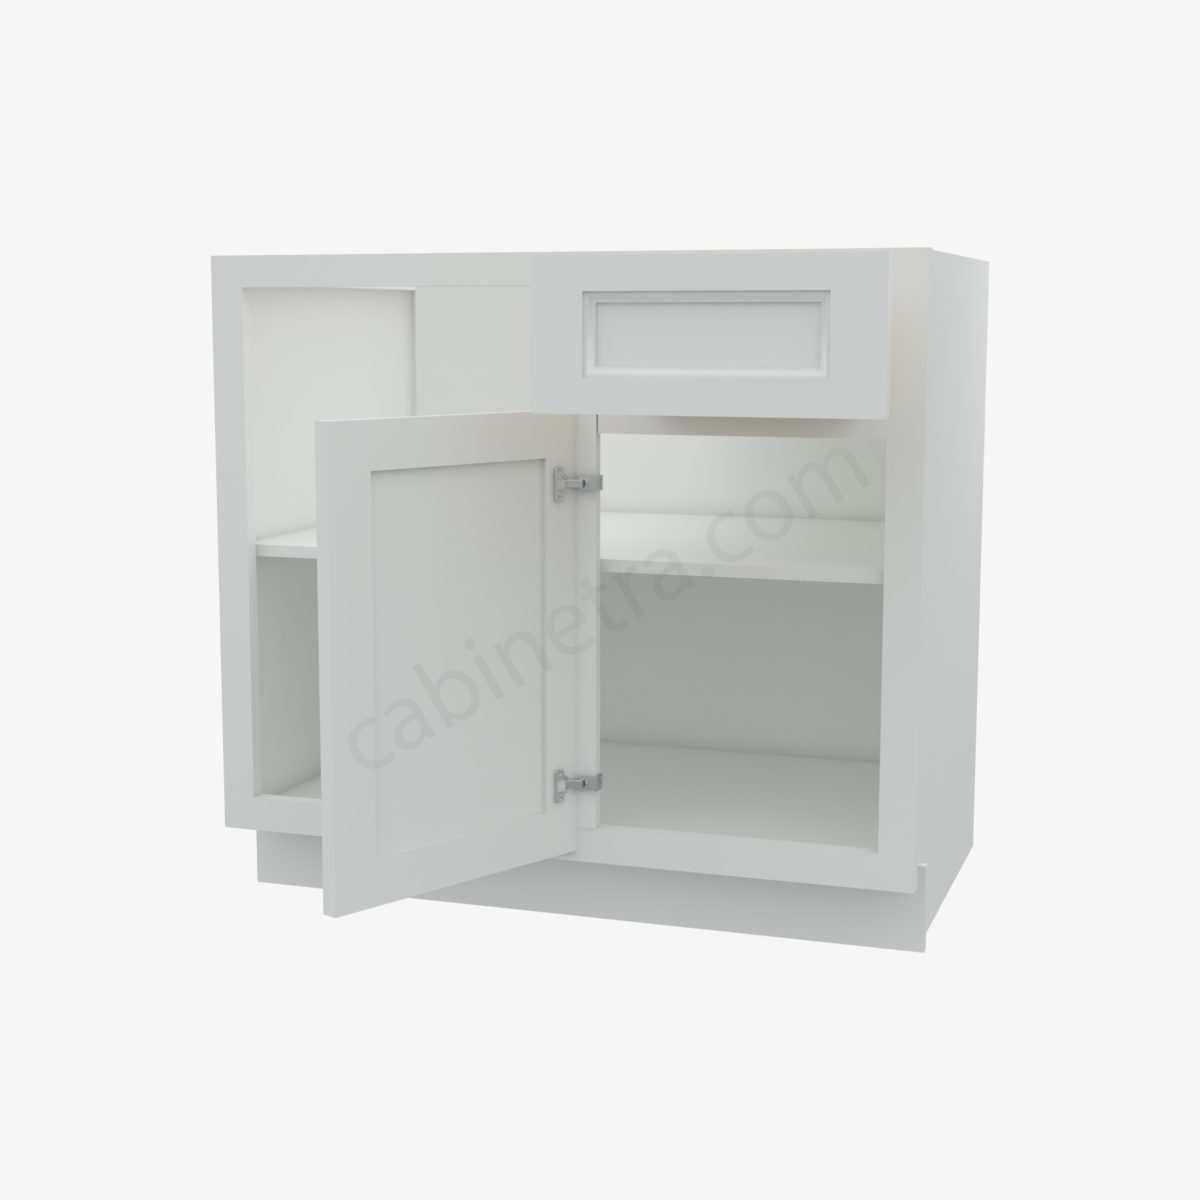 TW BBLC39 42 36W 5 Forevermark Uptown White Cabinetra scaled